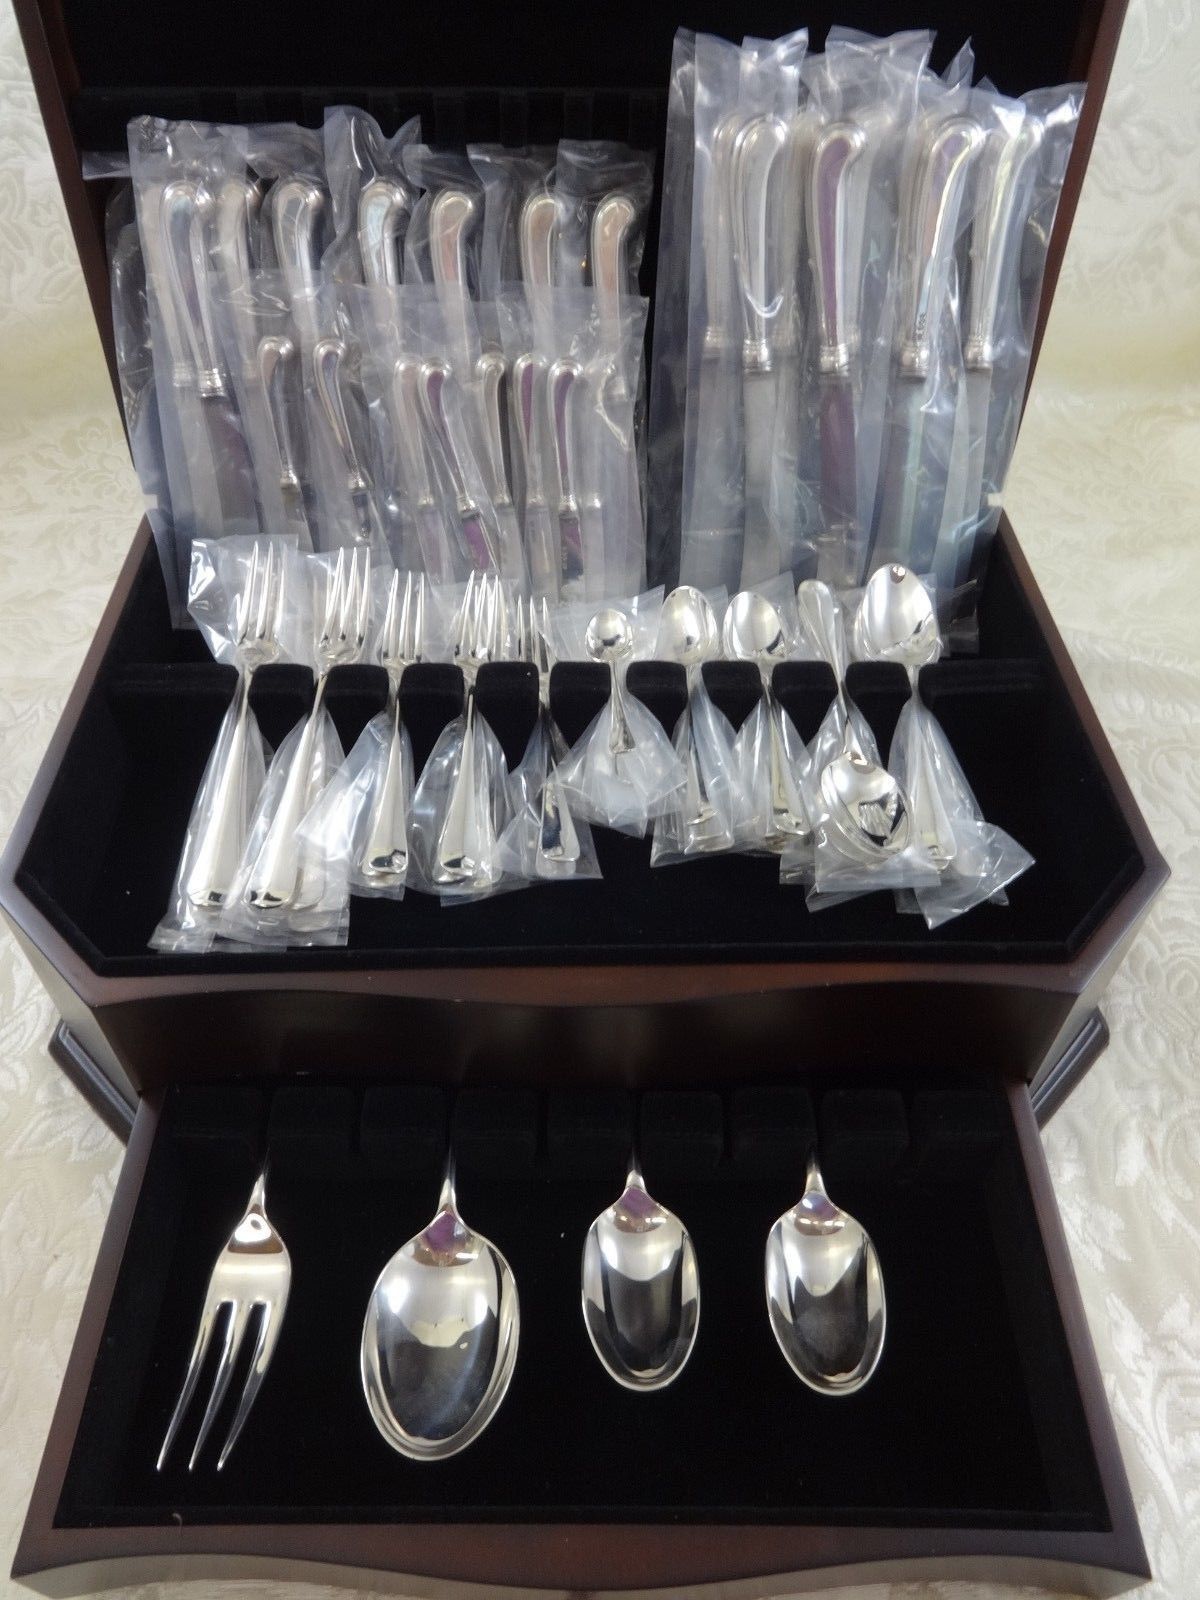 Queen Ann by Worcester (England) sterling silver dinner size flatware set of 68 pieces. The pistol grip handle knives are wonderful! This set includes:

Eight dinner size knives, 9 3/4